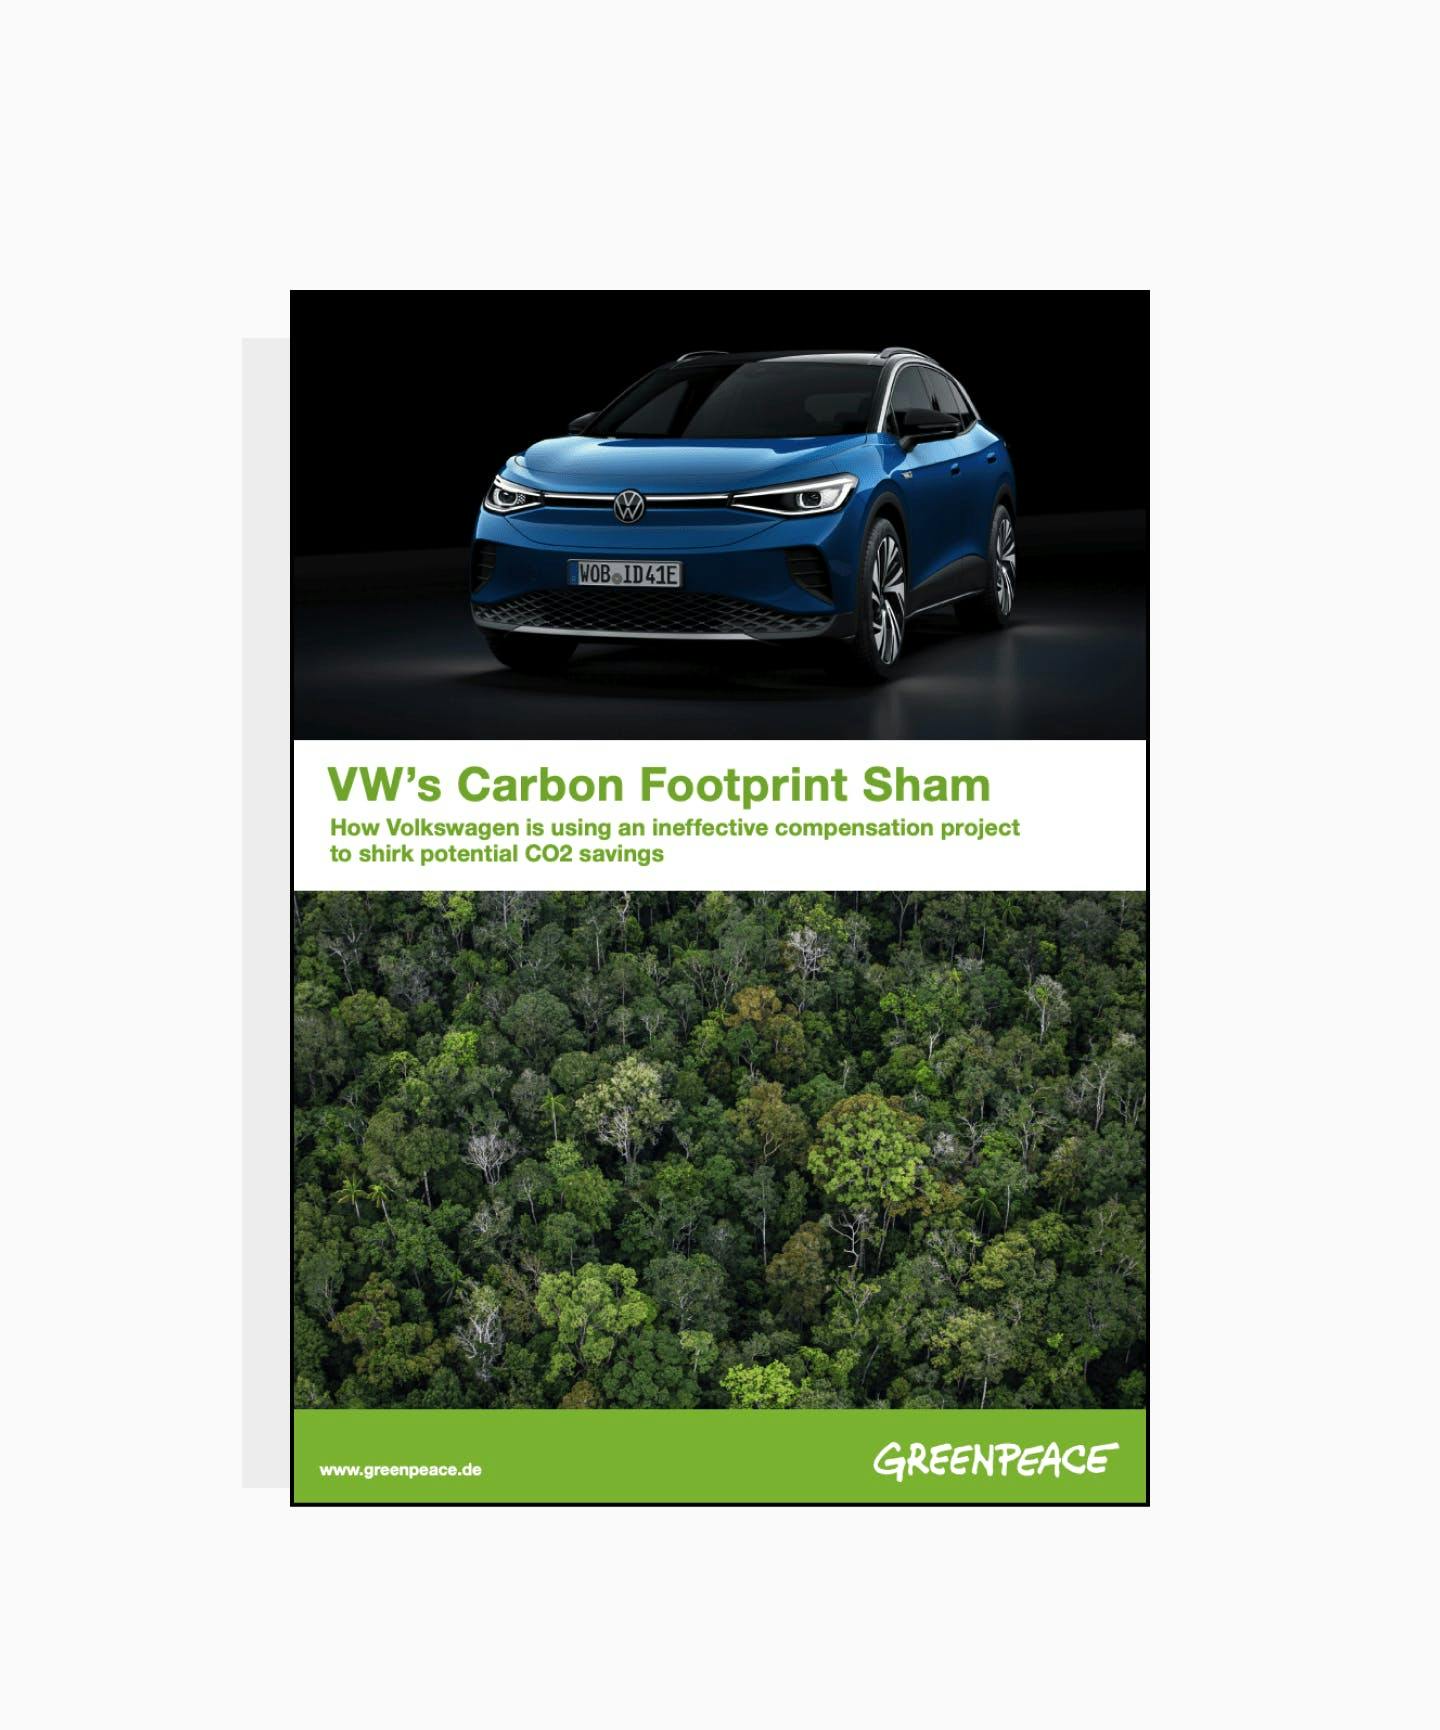 VW's carbon footprint sham – the first page of Greenpeace's report on Volkswagen's carbon offsetting scheme